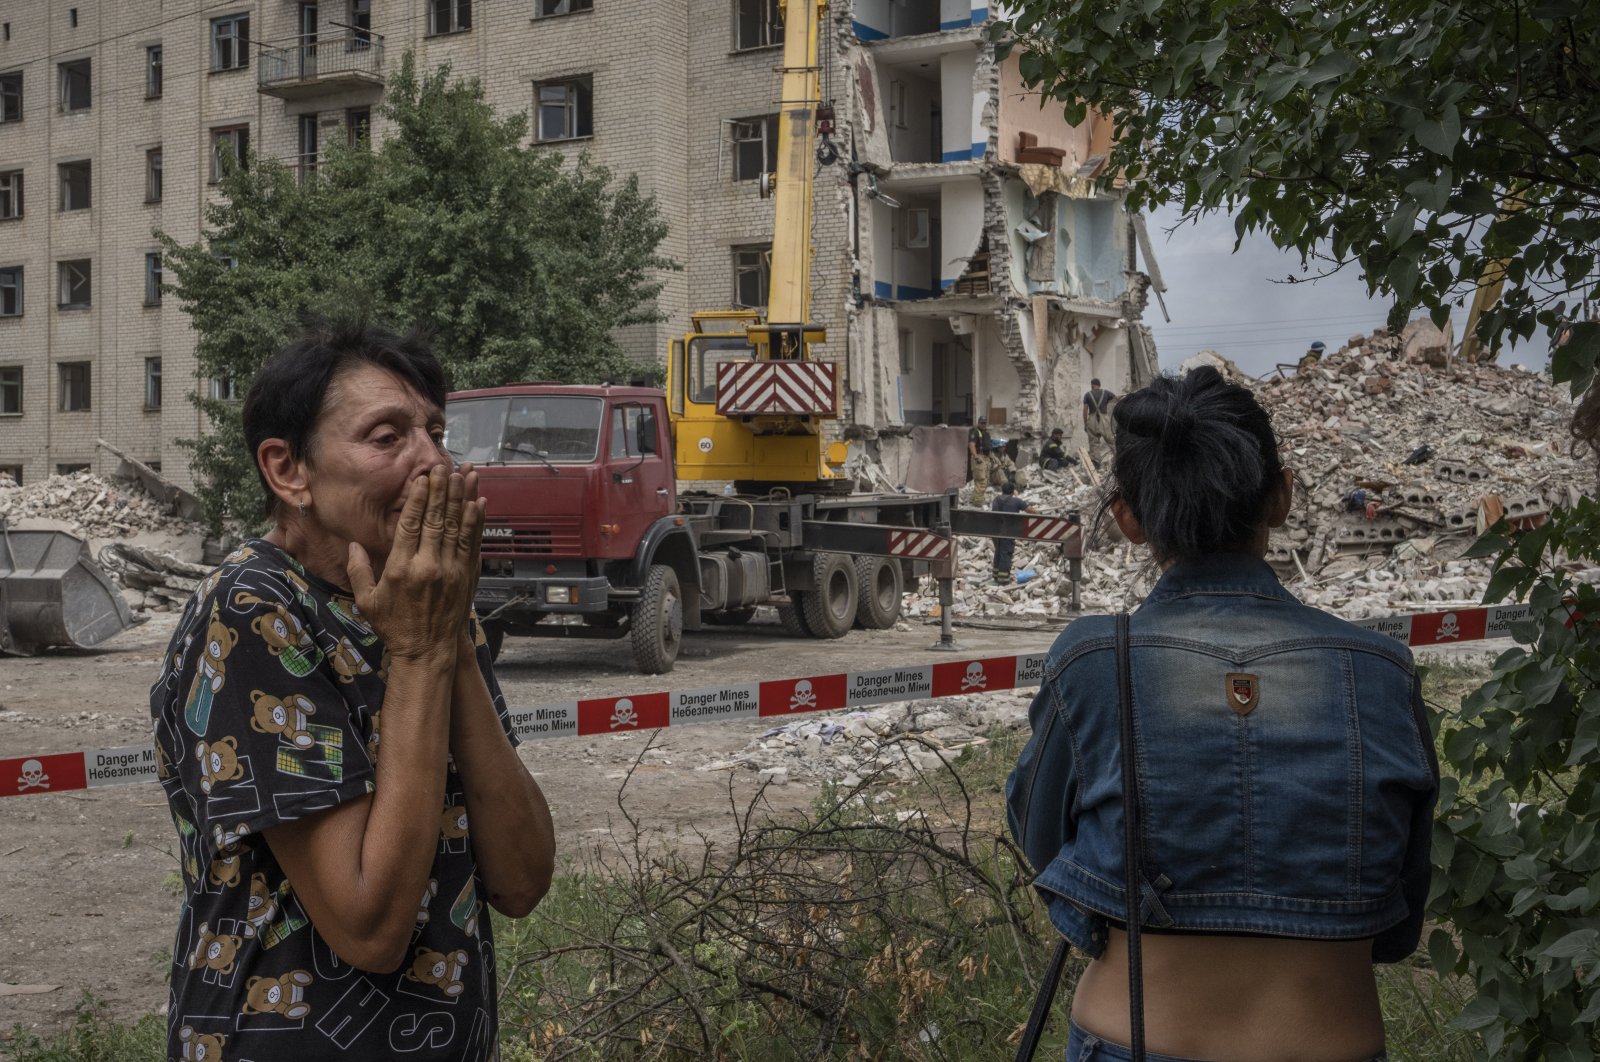 Iryna Shulimova, 59, weeps at the scene in the aftermath of a Russian rocket that hit an apartment residential block, in Chasiv Yar, Donetsk region, eastern Ukraine, July 10, 2022. (AP Photo)